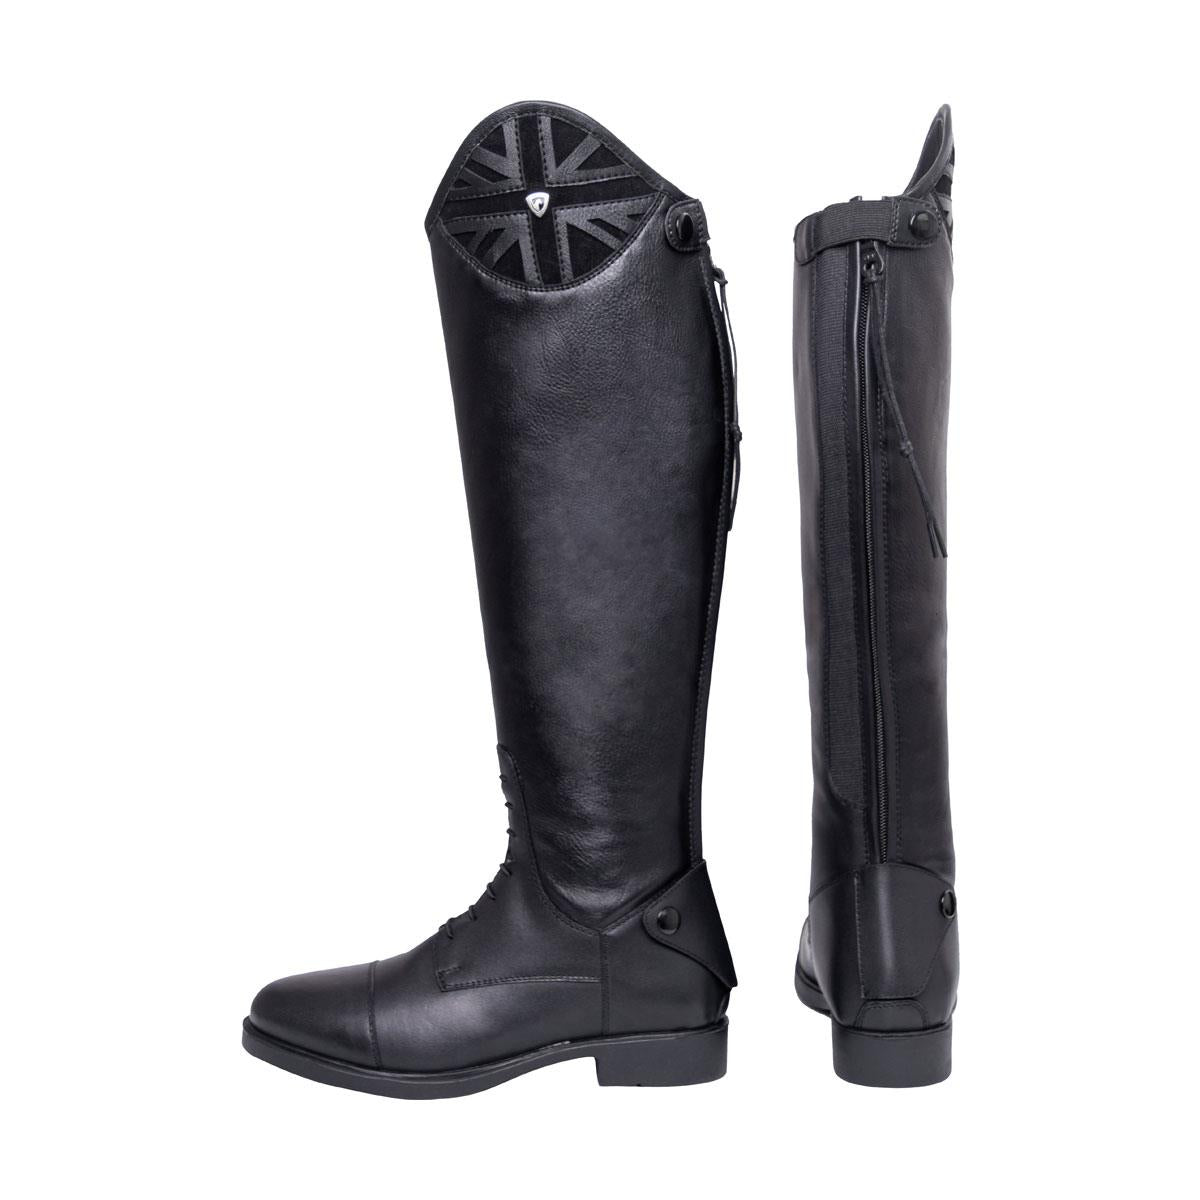 Hy Equestrian Union Jack Riding Boots - Just Horse Riders